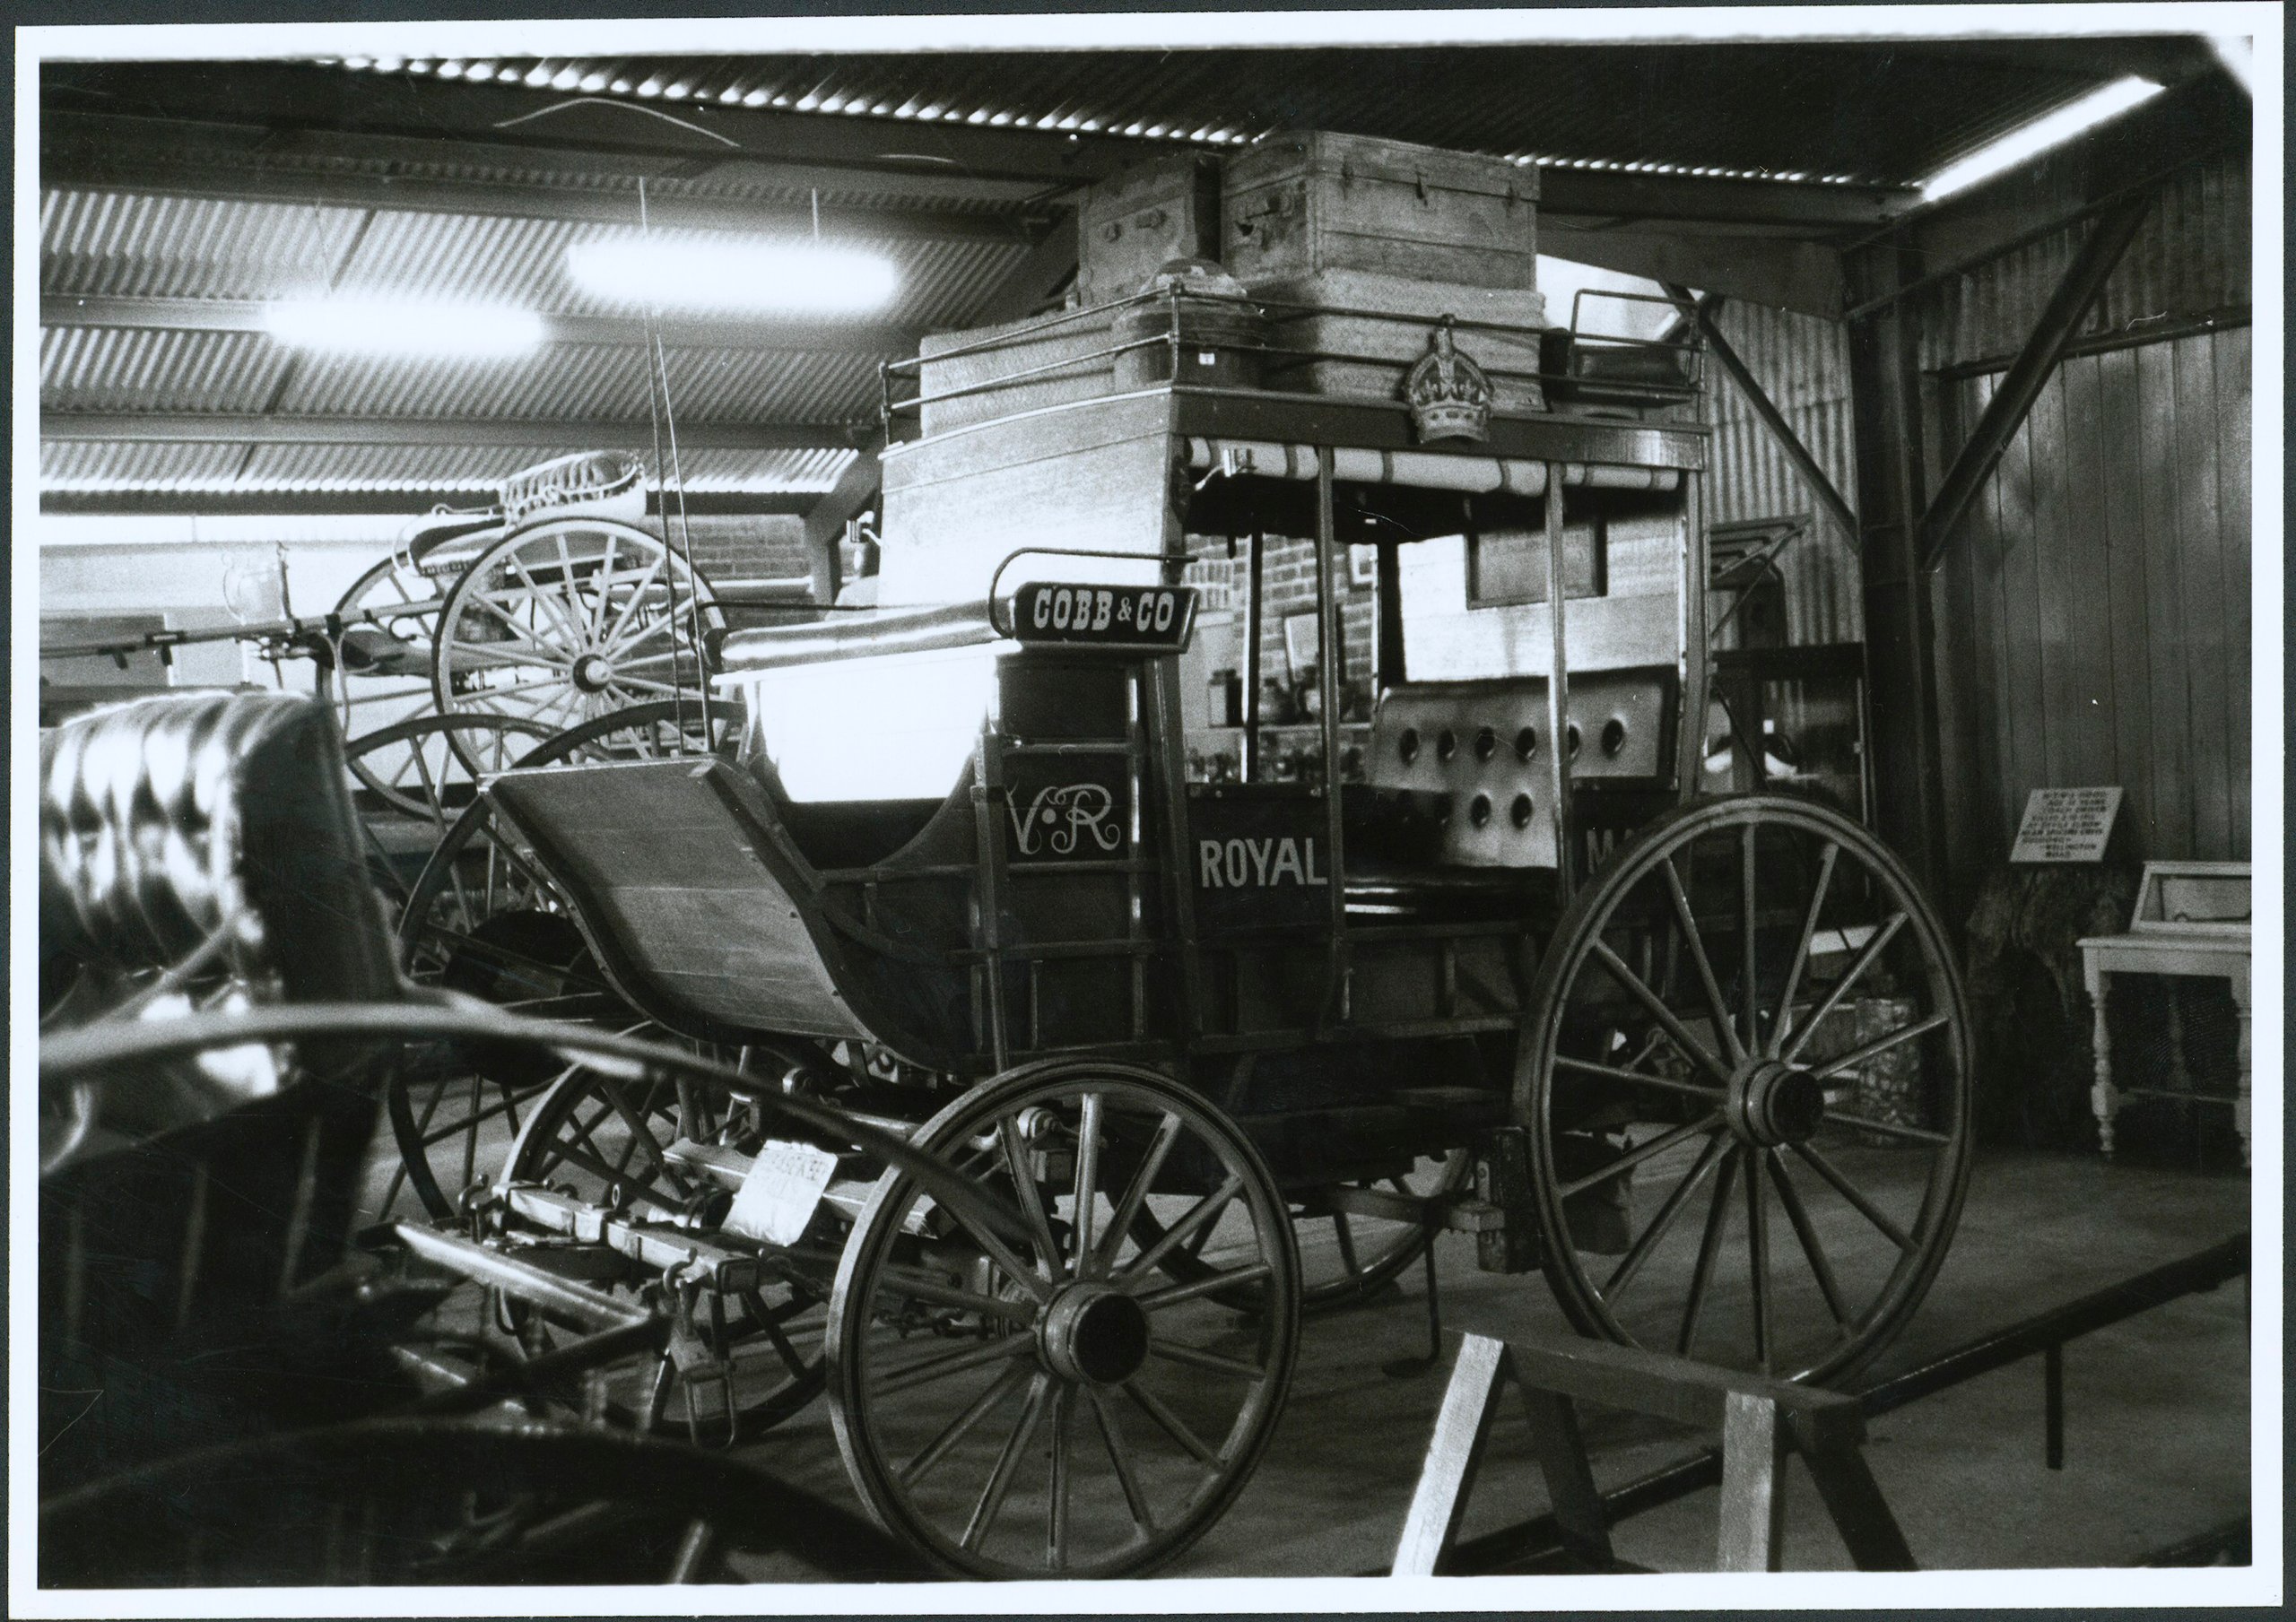 Cobb & Co mail and passenger coach made by Cobb & Co., Charleville, Qld, 1890